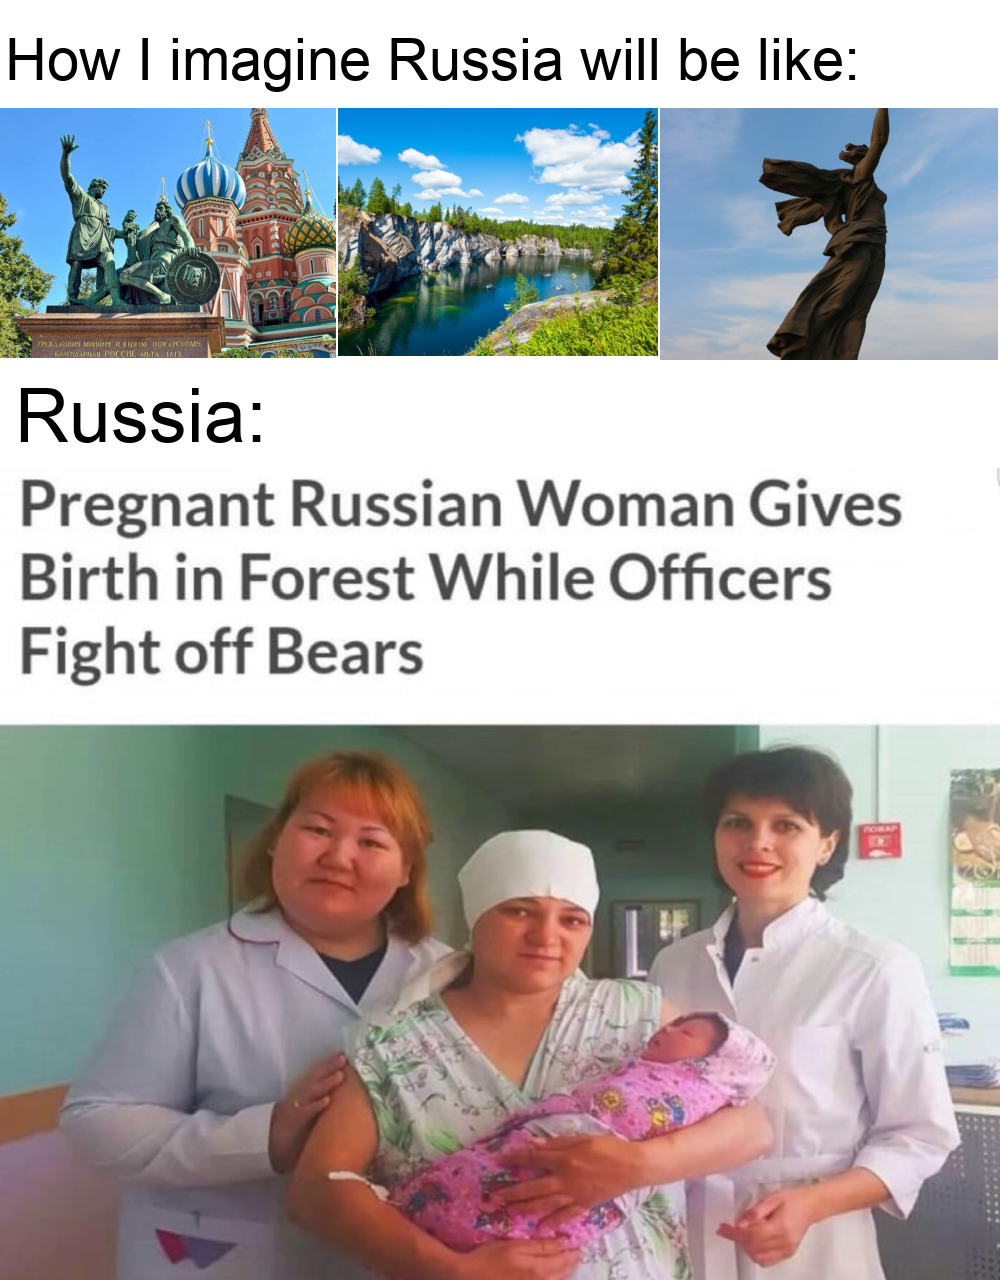 Oh those Russians...